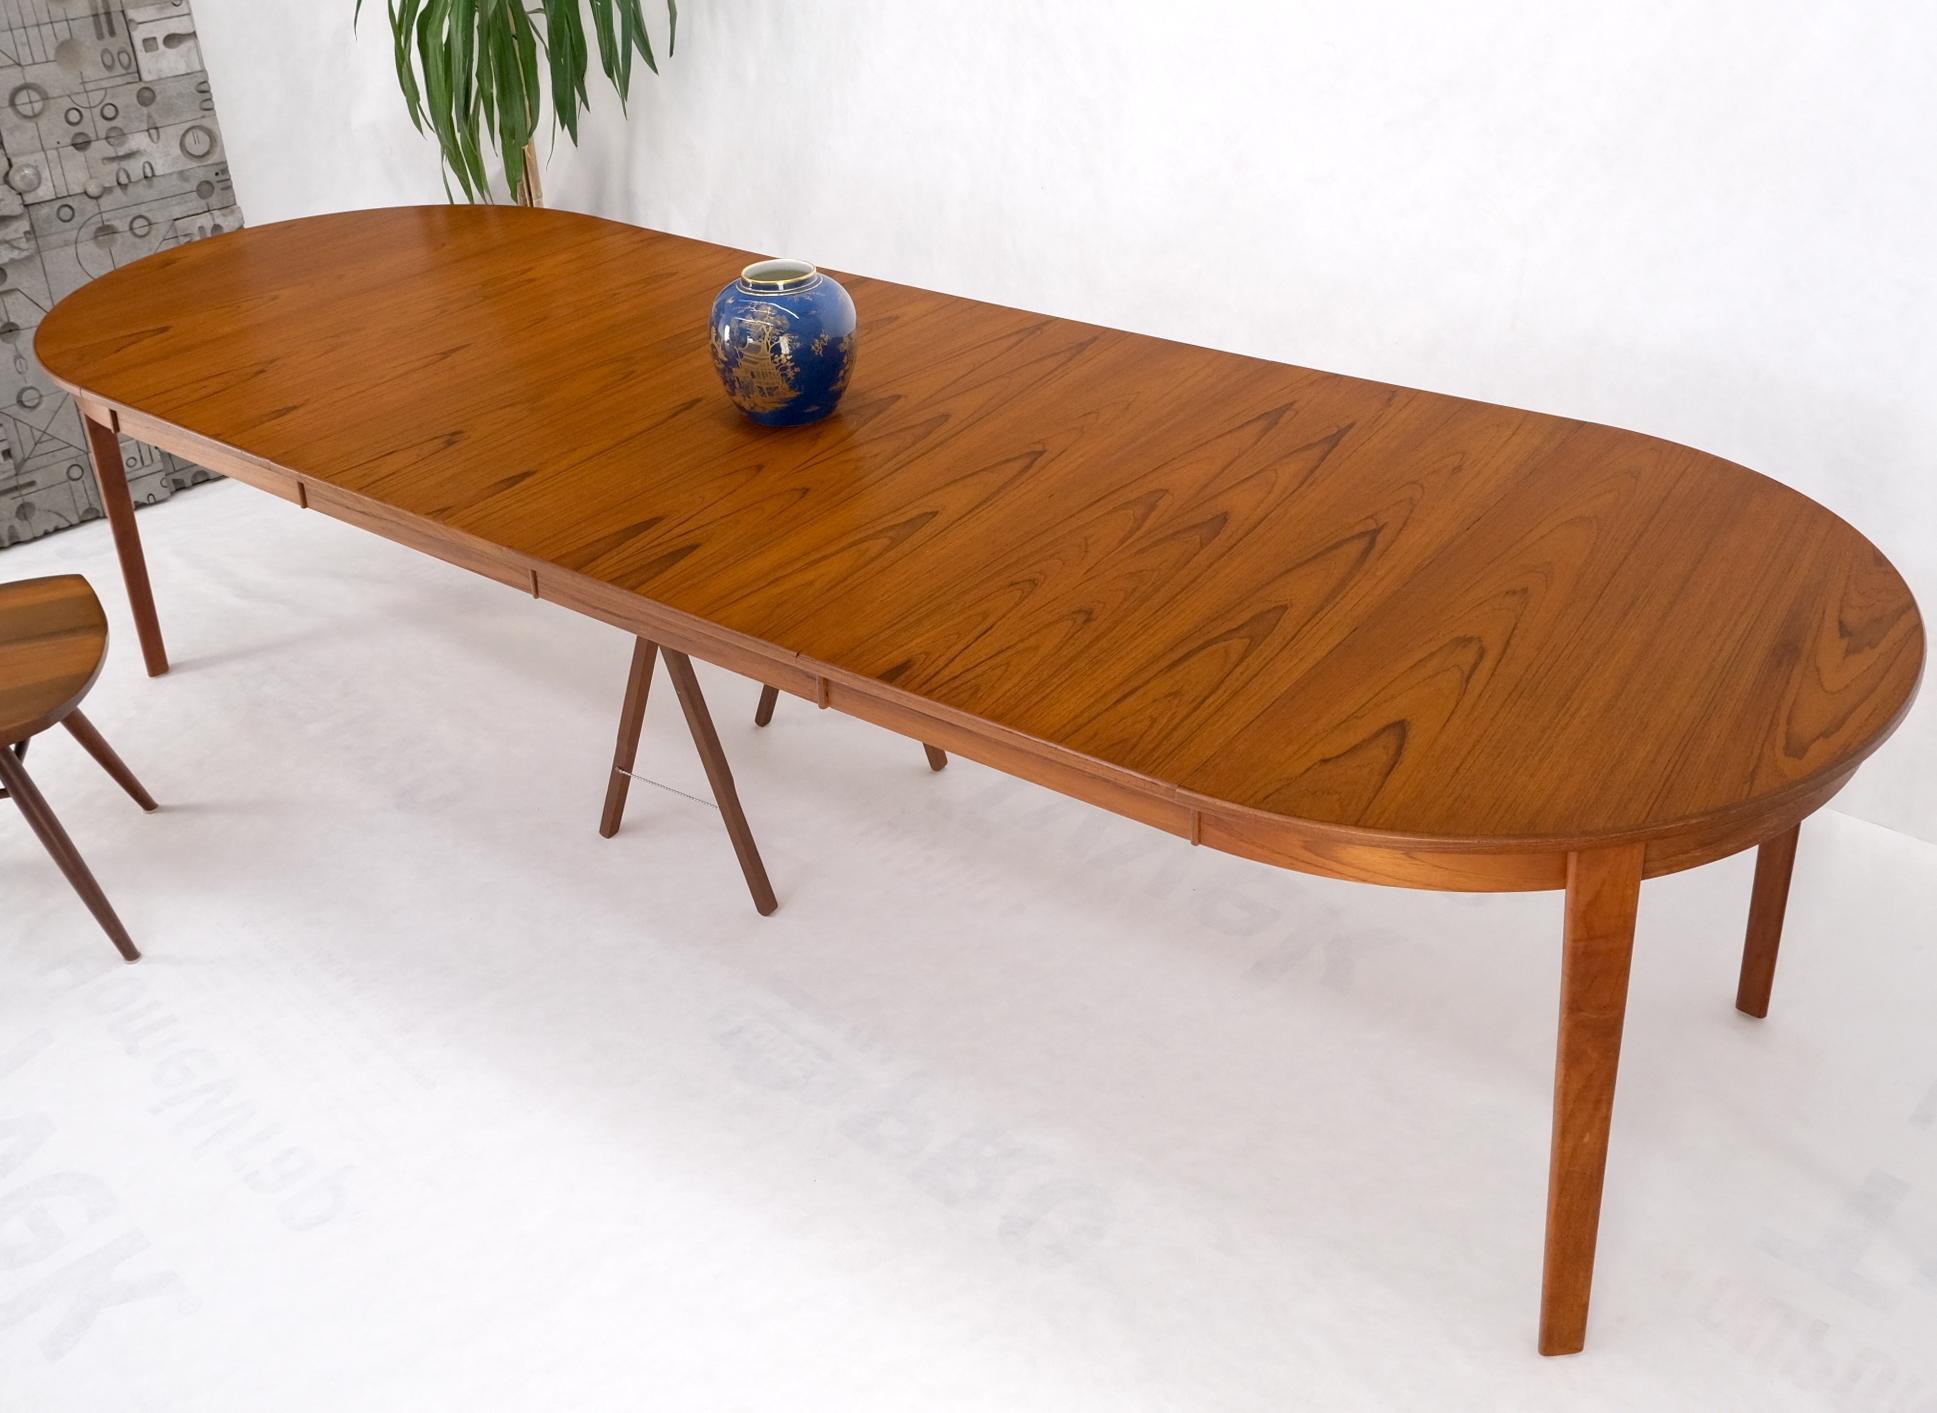 20th Century Danish Teak Mid Century Modern Round Dining Banquet Conference Table 4 Leaf MINT For Sale